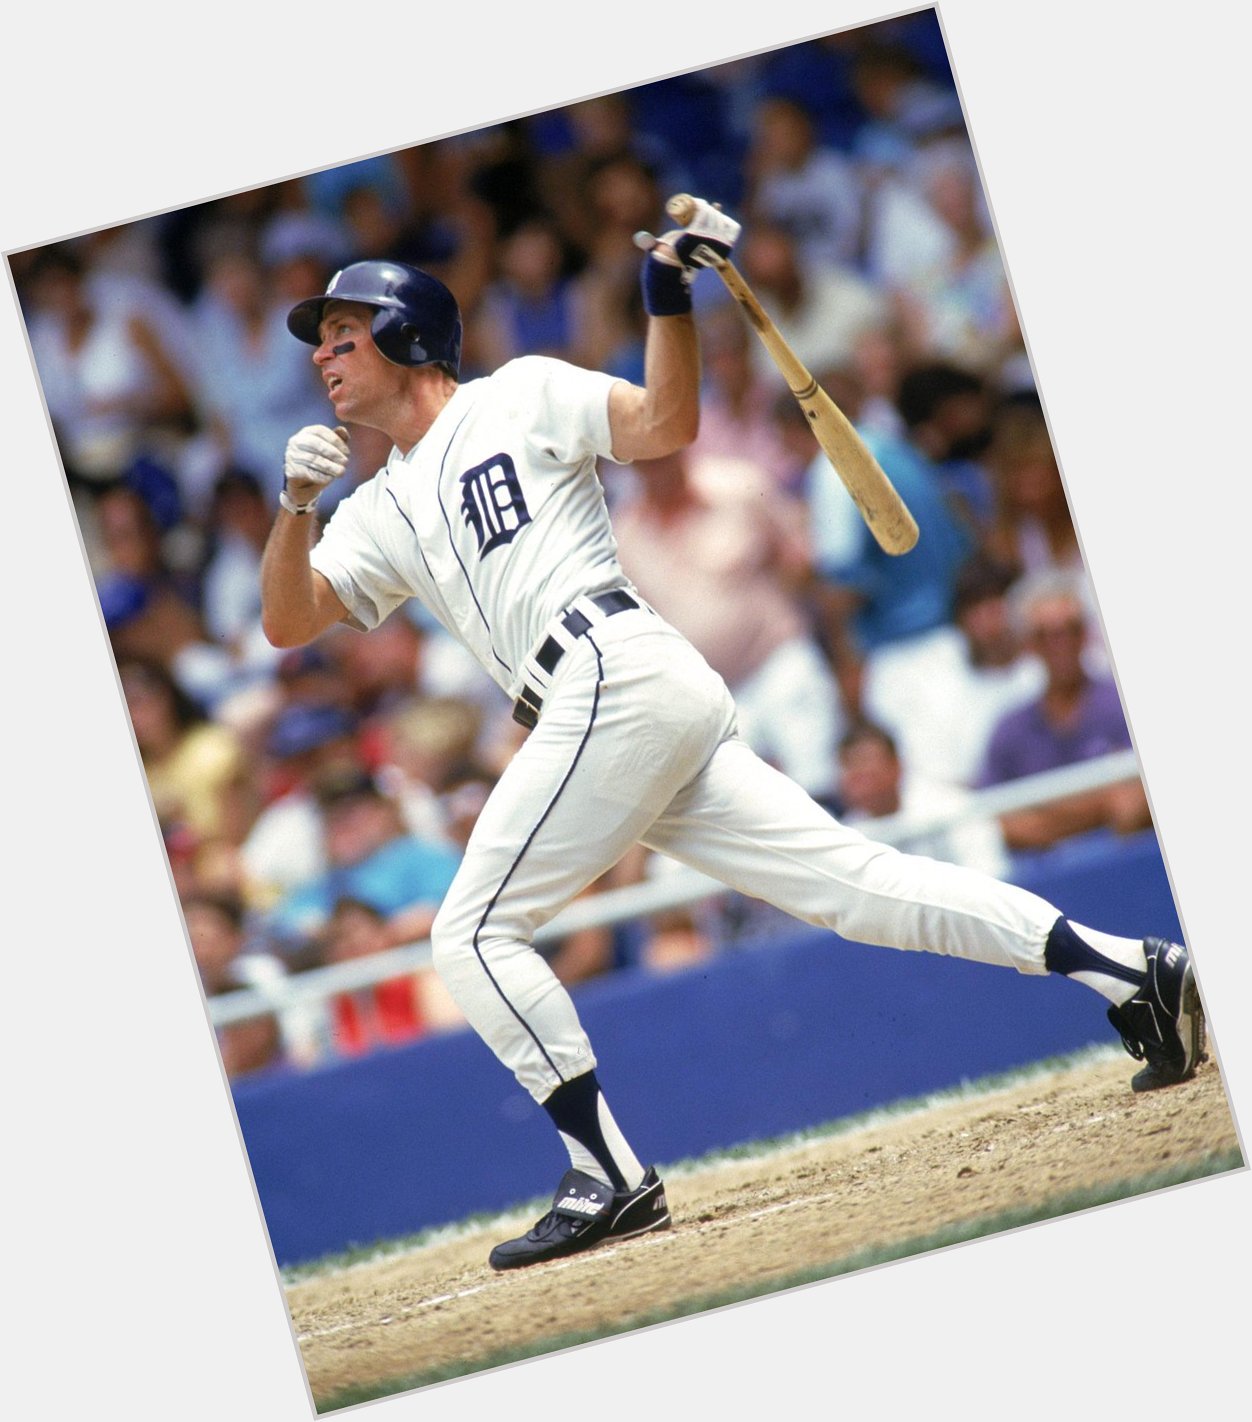 Happy 57th birthday to member Alan Trammell! His Hall Rating is 77th ALL TIME among eligibles.  